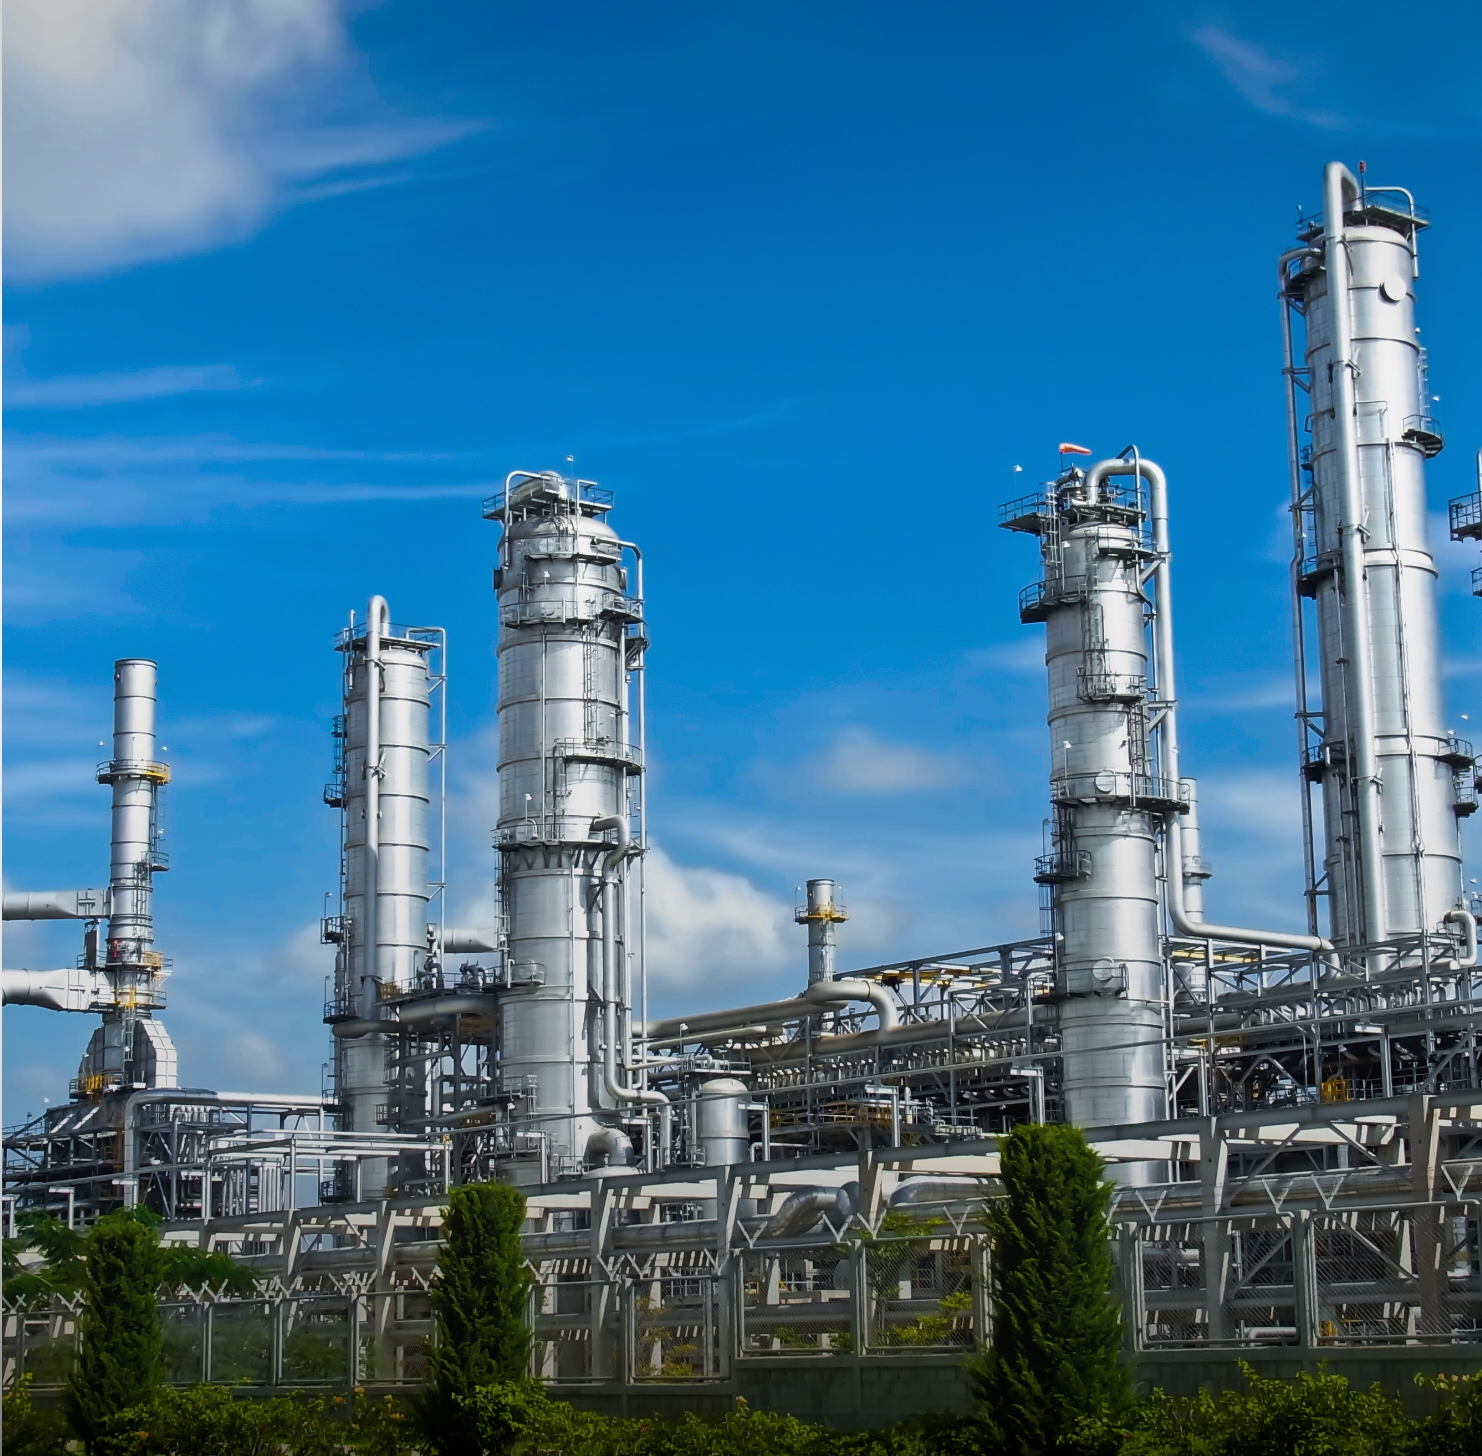 An exterior view of an oil refinery industry plant.